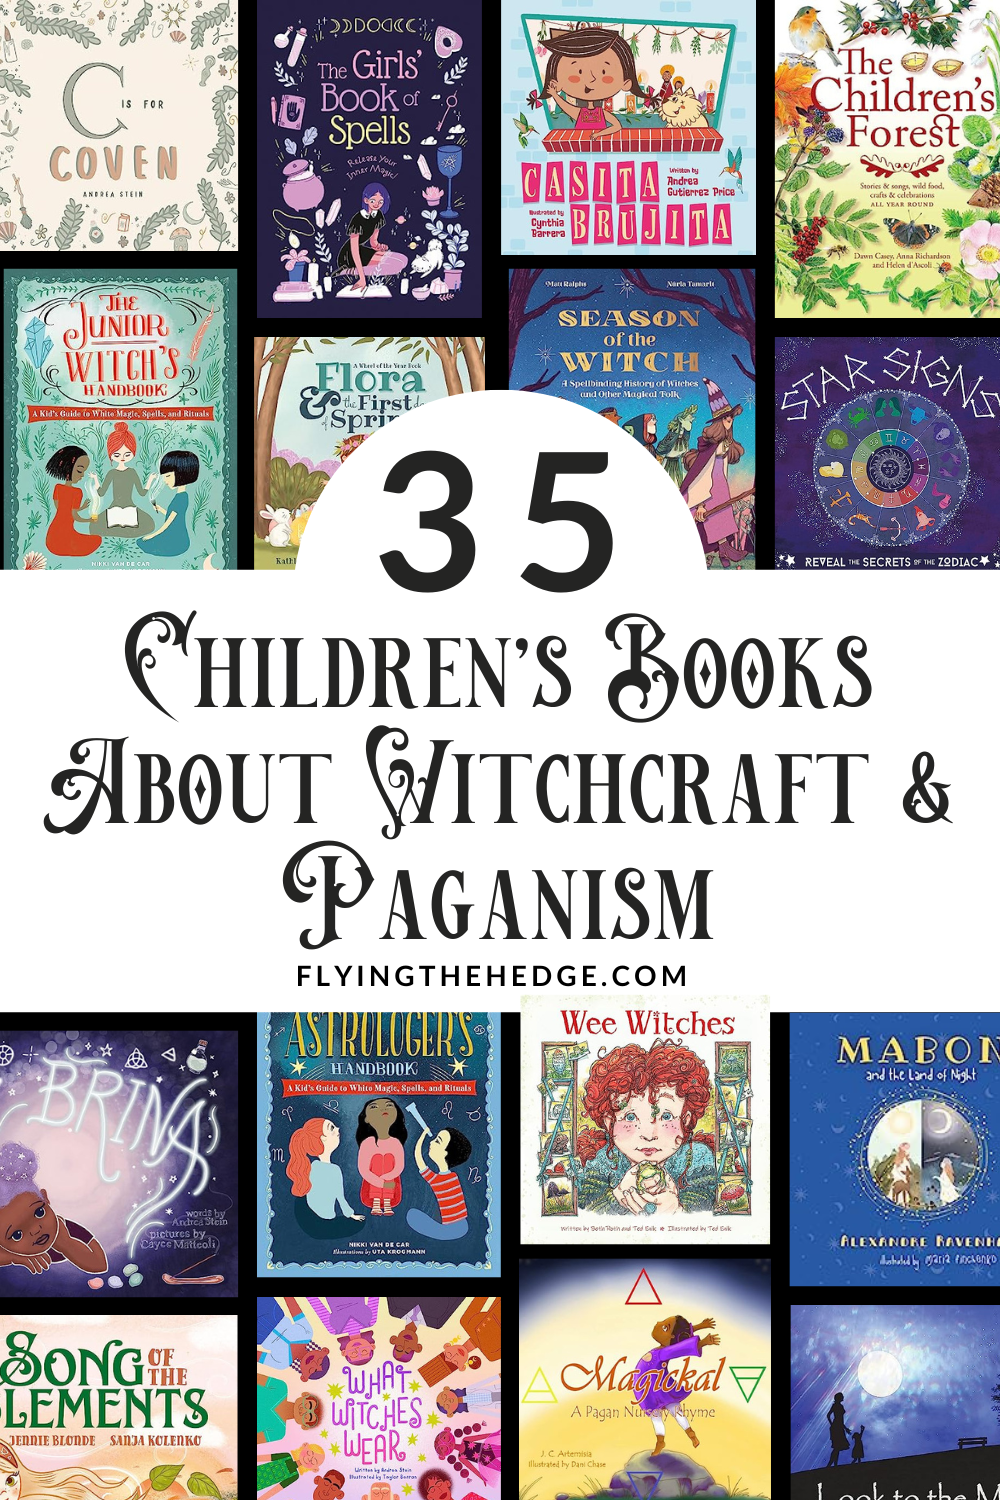 children's books, witch, witchcraft, pagan, paganism, witchy, teen witch, baby witch, book review